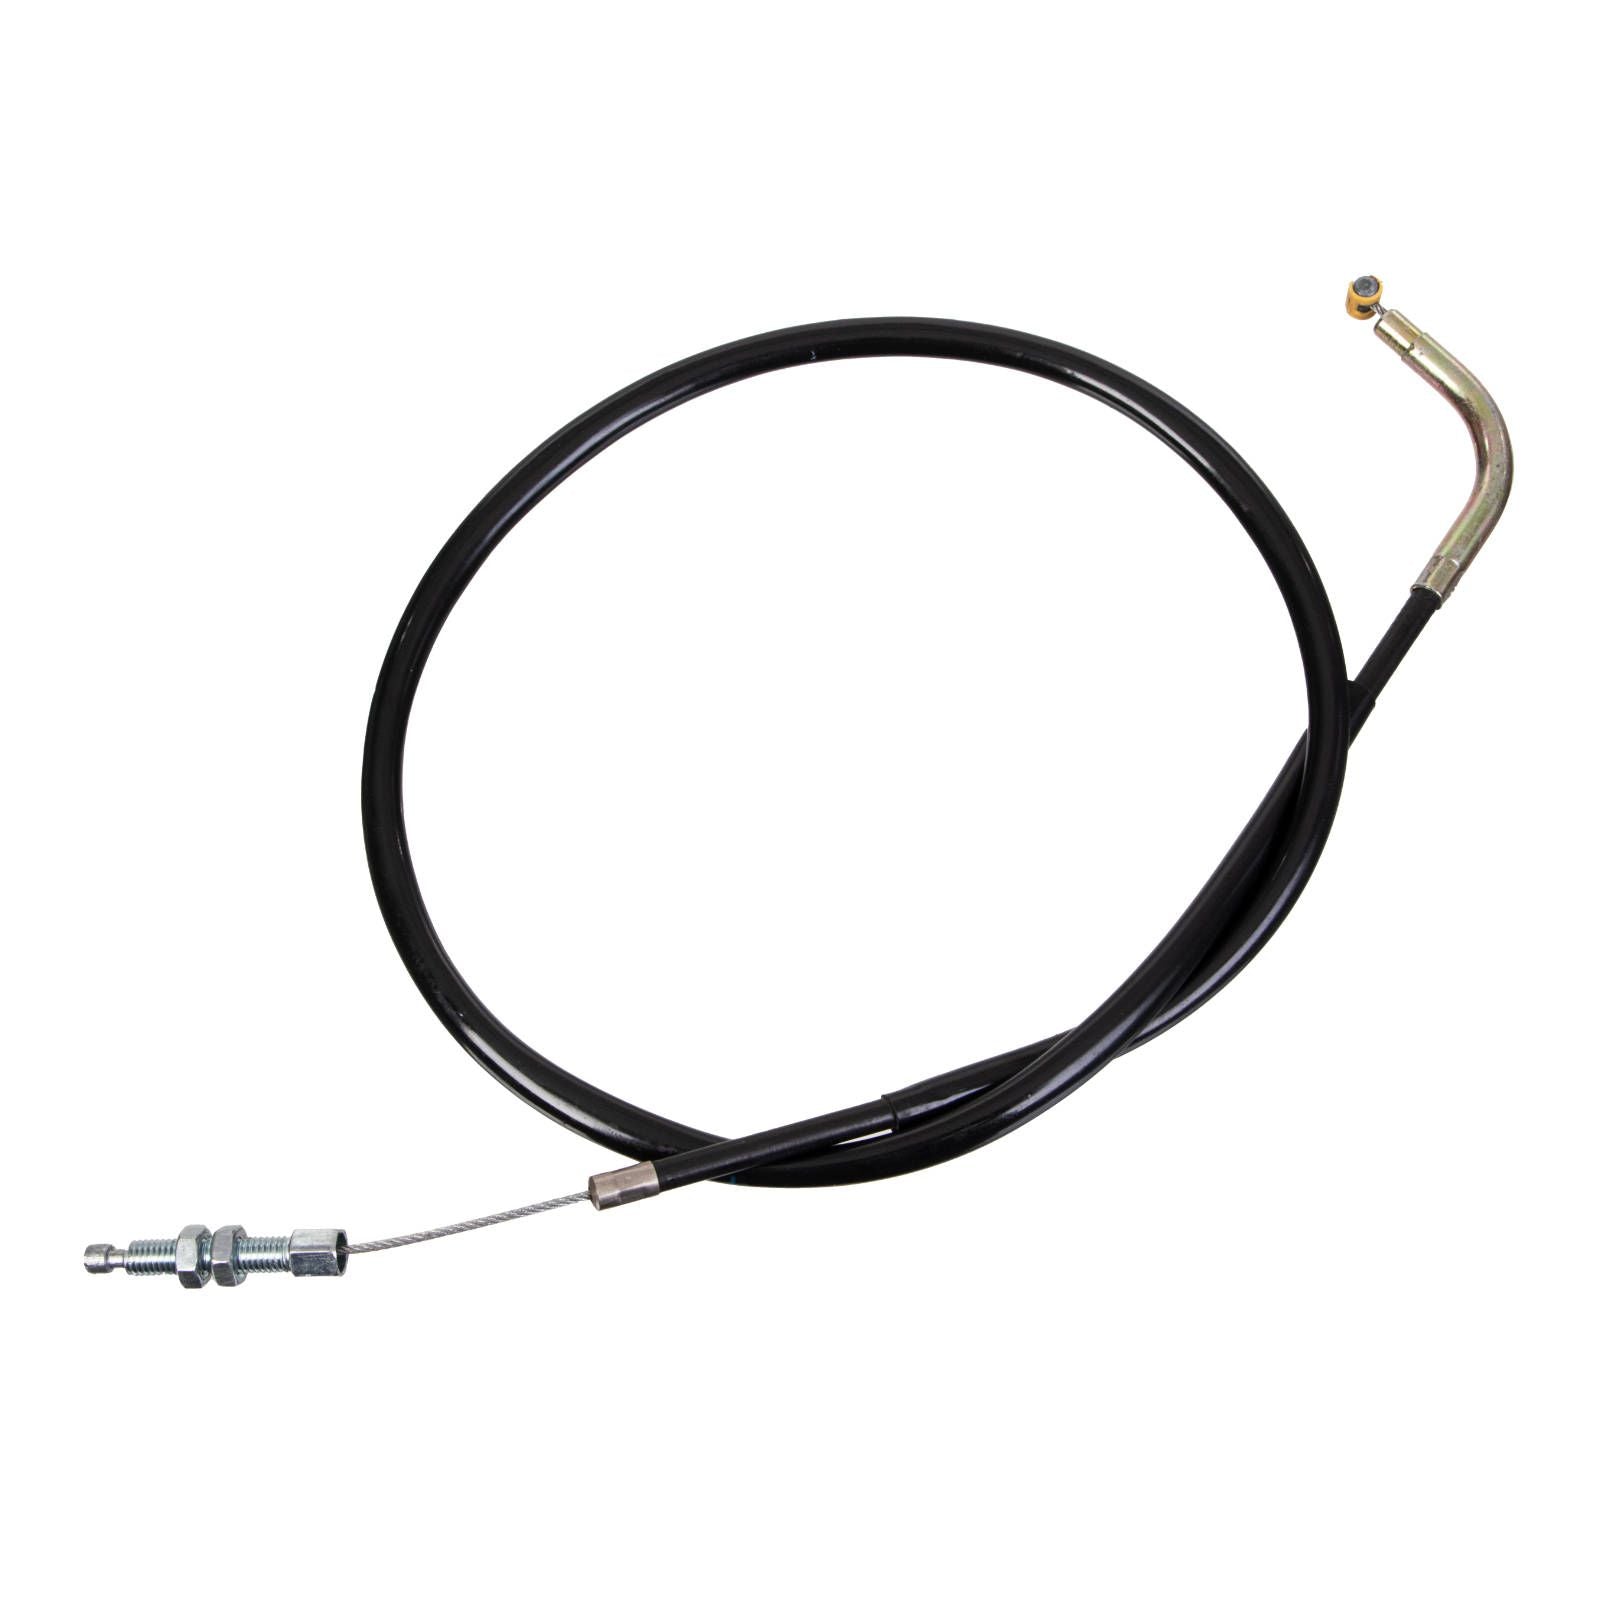 New WHITES Clutch Cable For Suzuki SV650 2003-2008 #WPCC05016